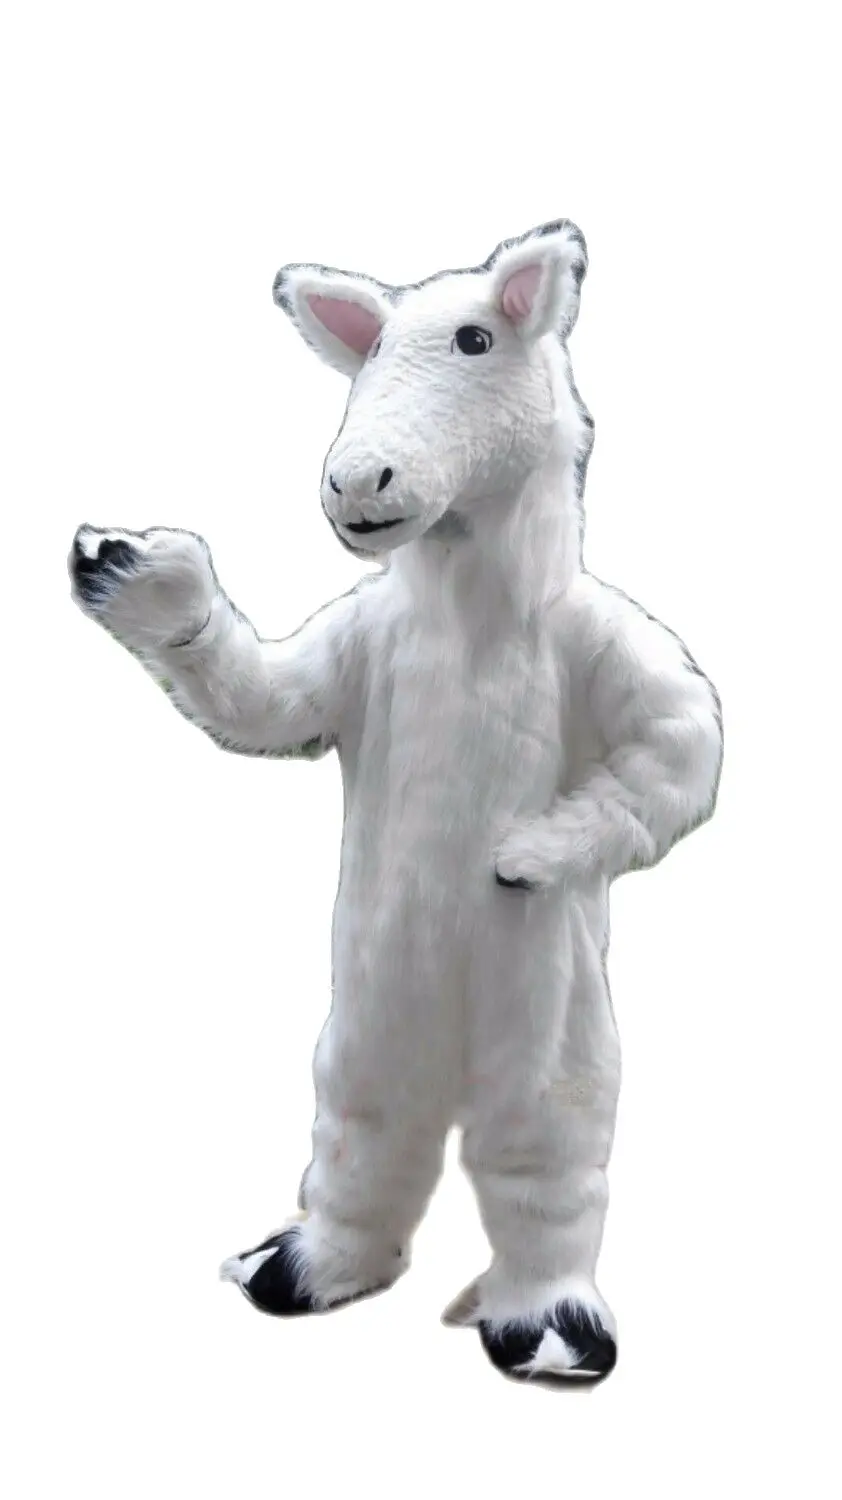 Furry White Horse Mascot Costume Long Fur Fursuit Party Cosplay Clothing Fancy Dress Carnival Animal Halloween Xmas Parade Suits